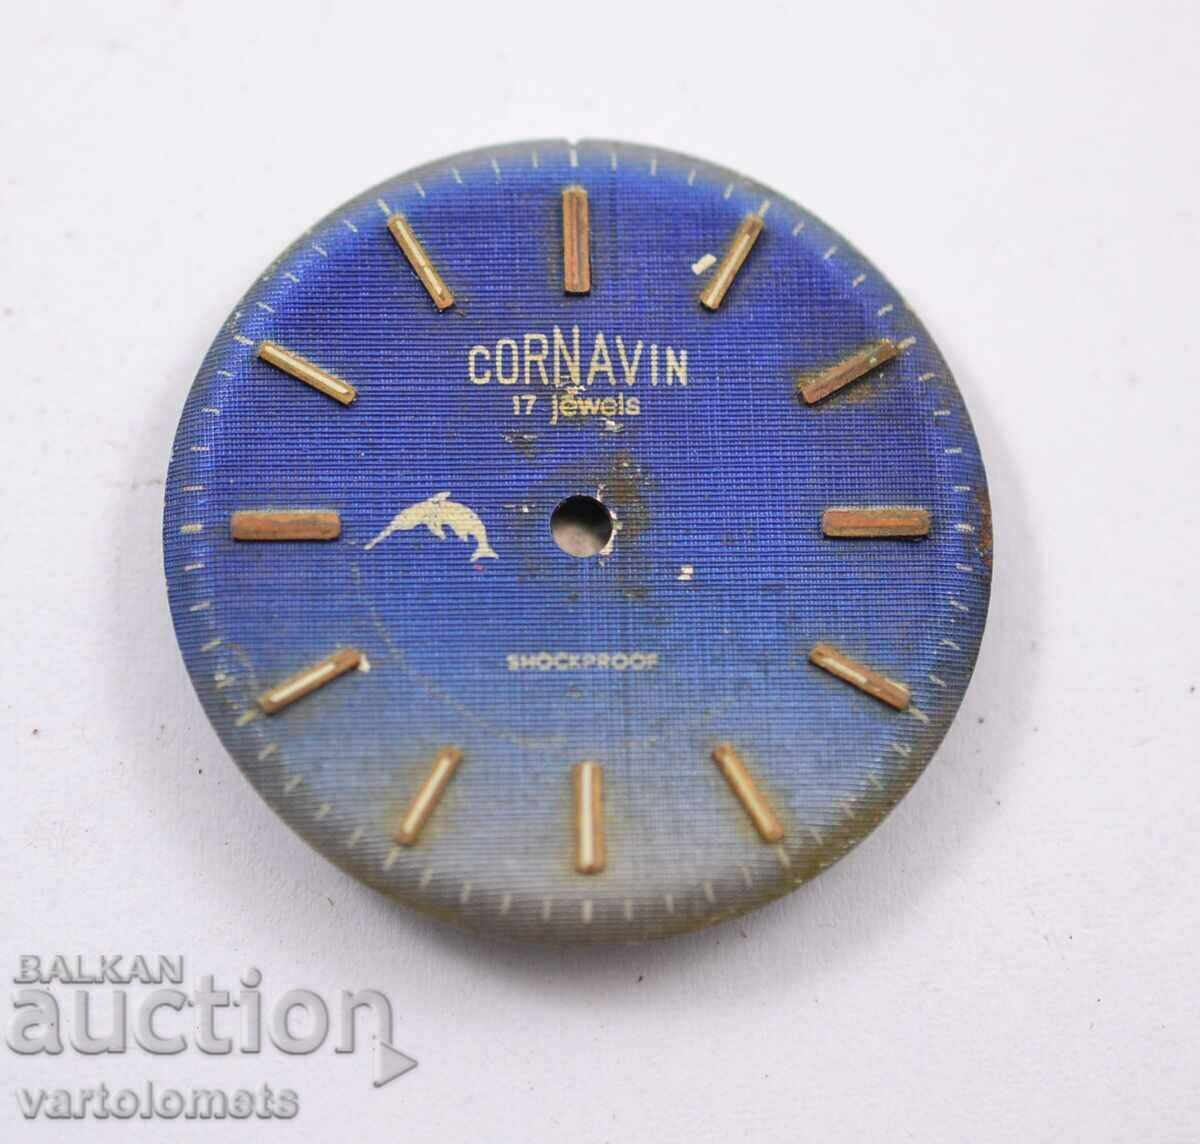 CORNAVIN dial and case back